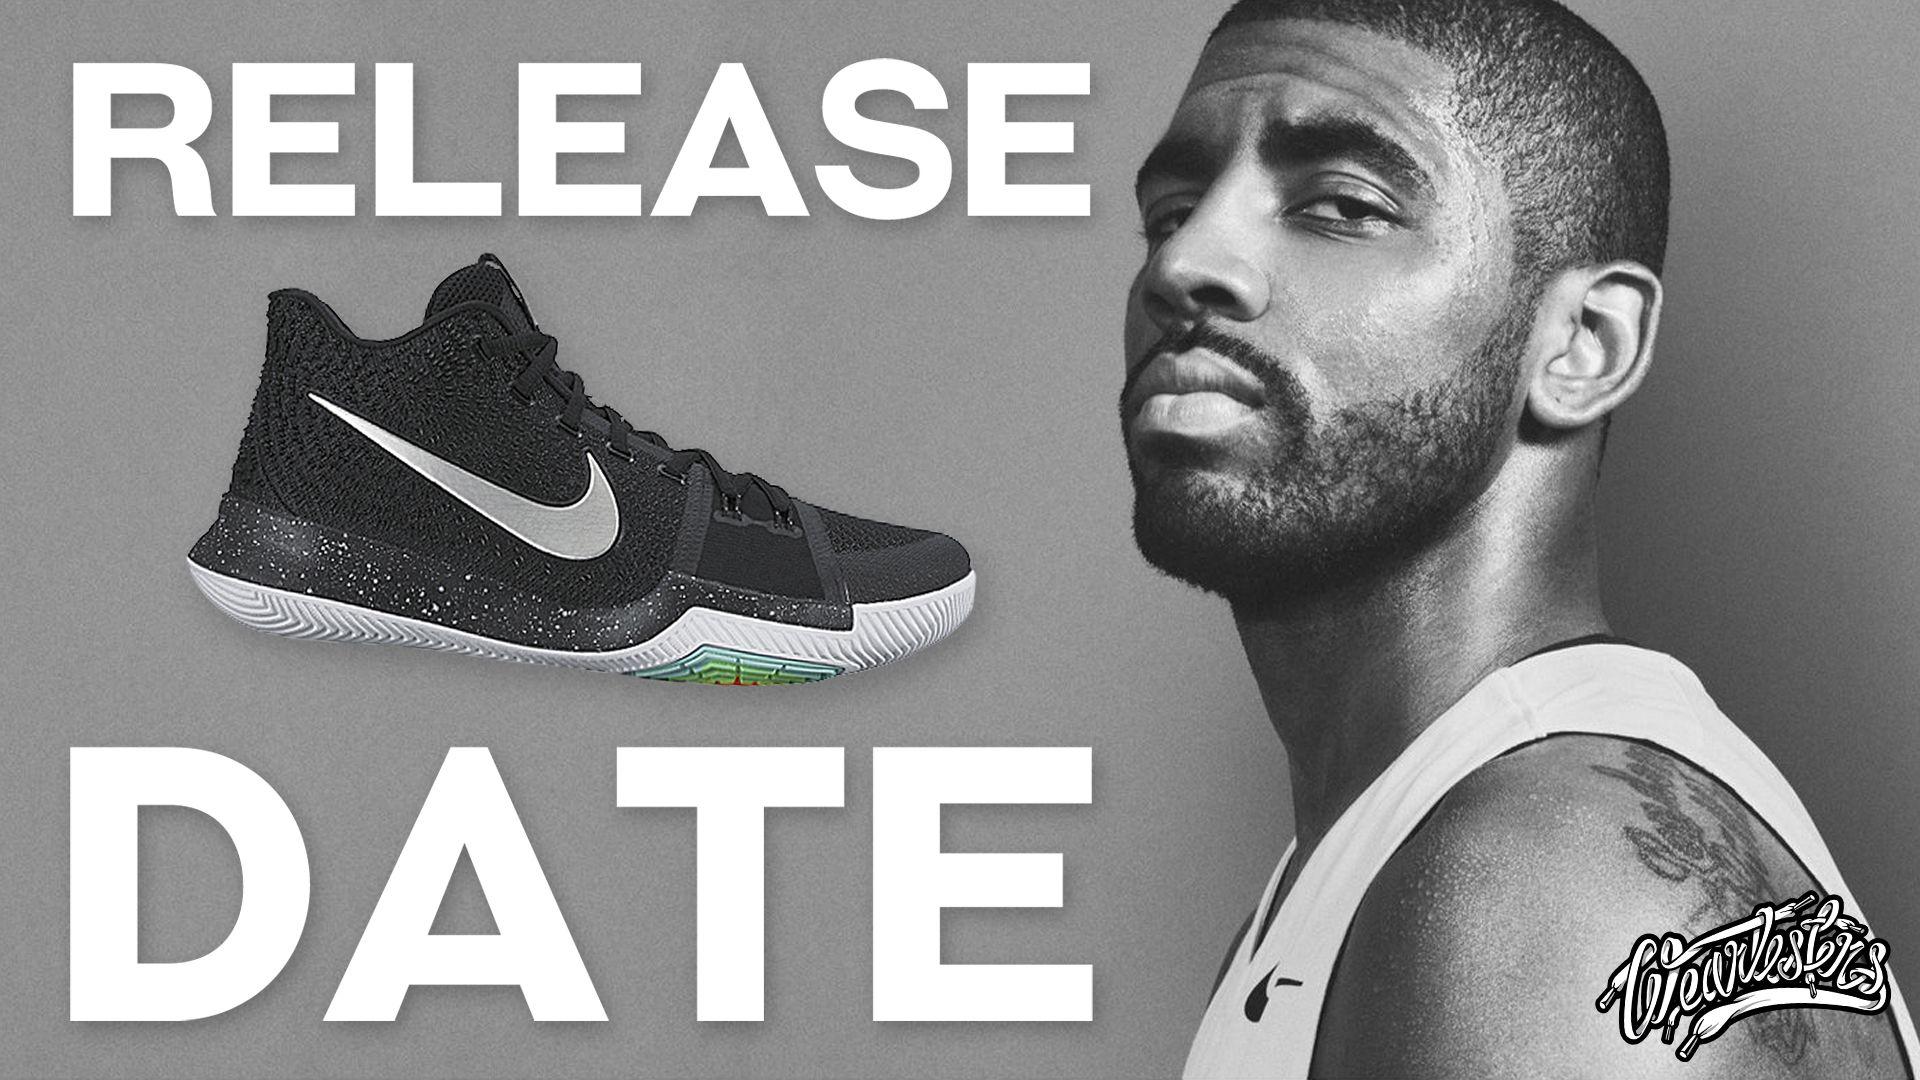 kyrie shoes hd